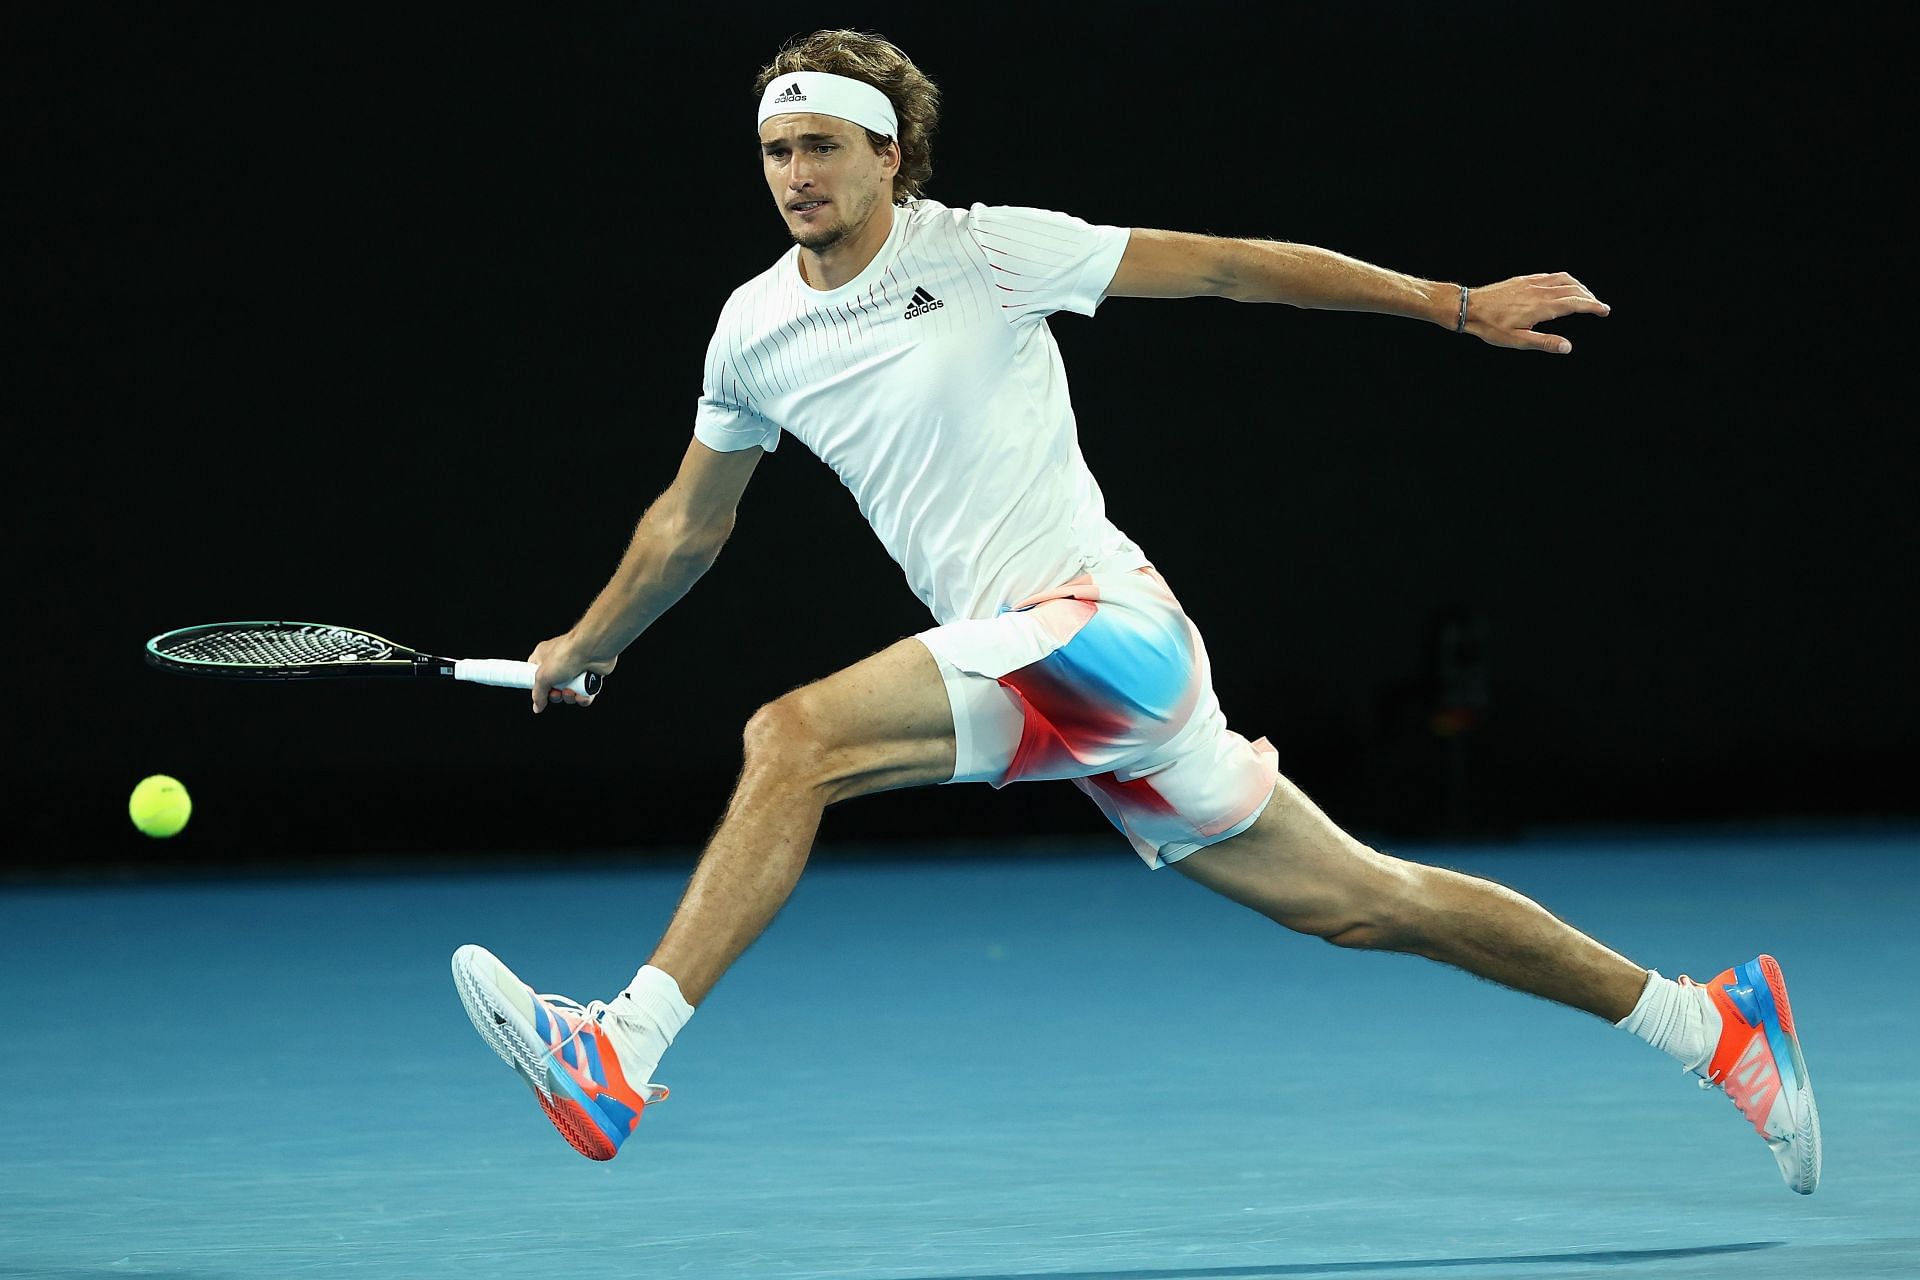 Alexander Zverev is seeded second at the 2022 Monte-Carlo Masters.